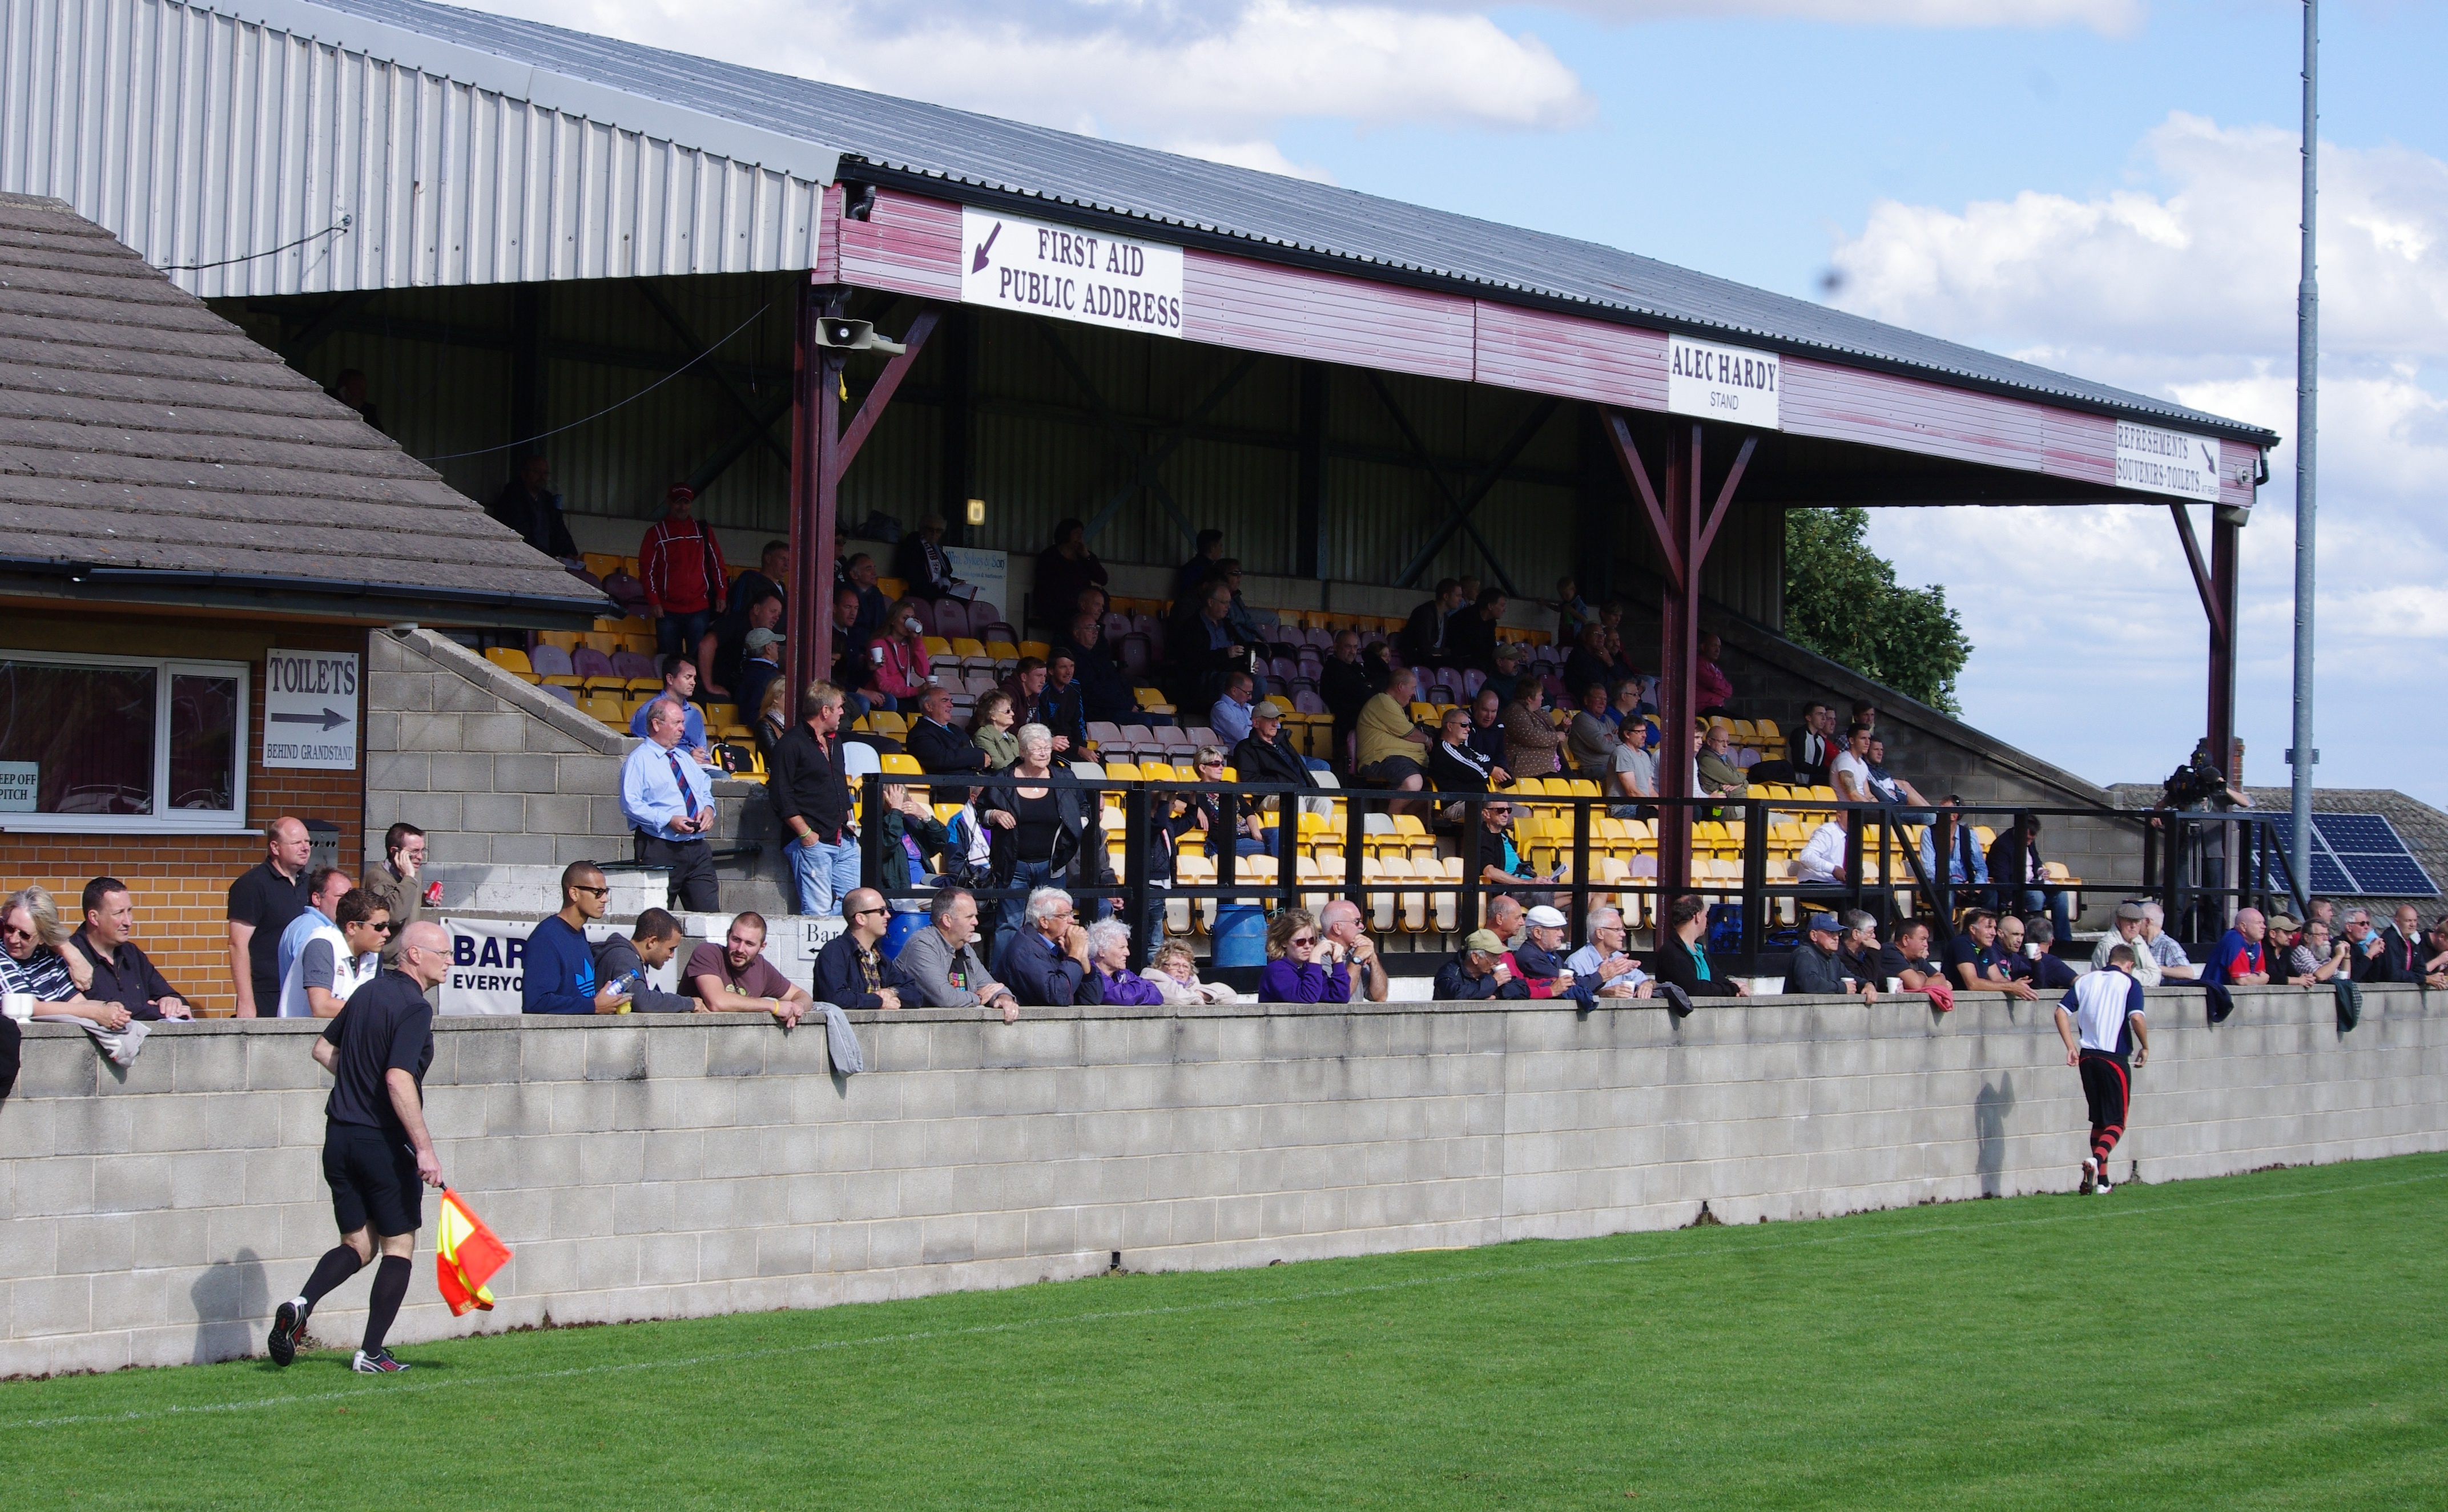 AFC Emley require a programme editor and photographers for next season